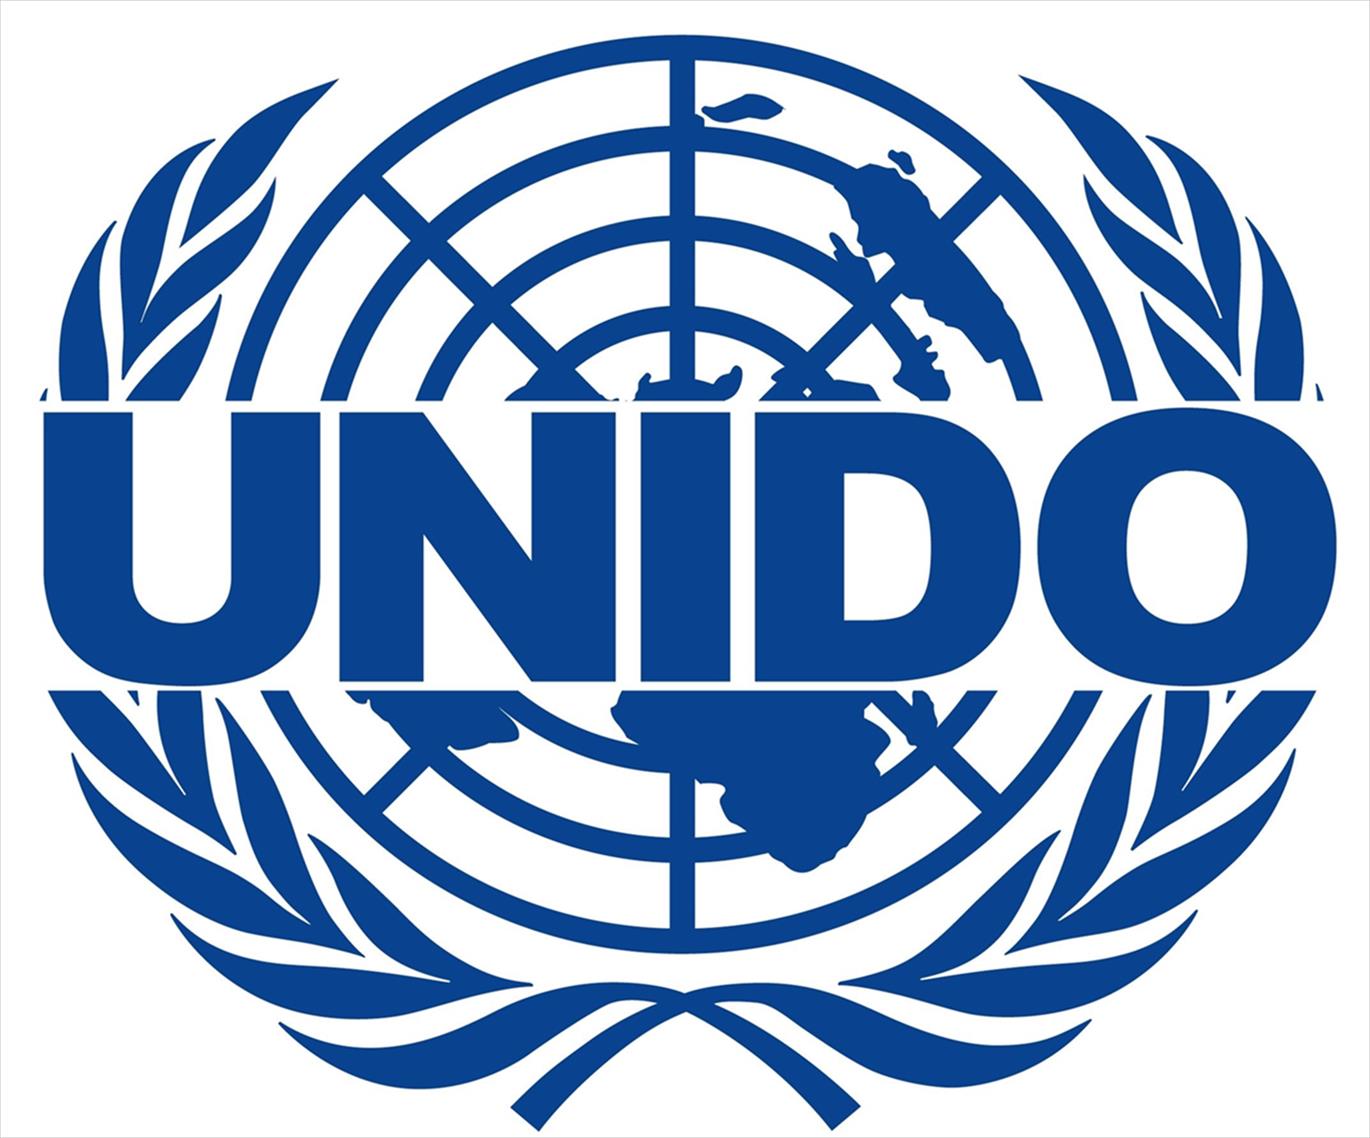 18th General Conference of the United Nations Industrial Development Organization (UNIDO)